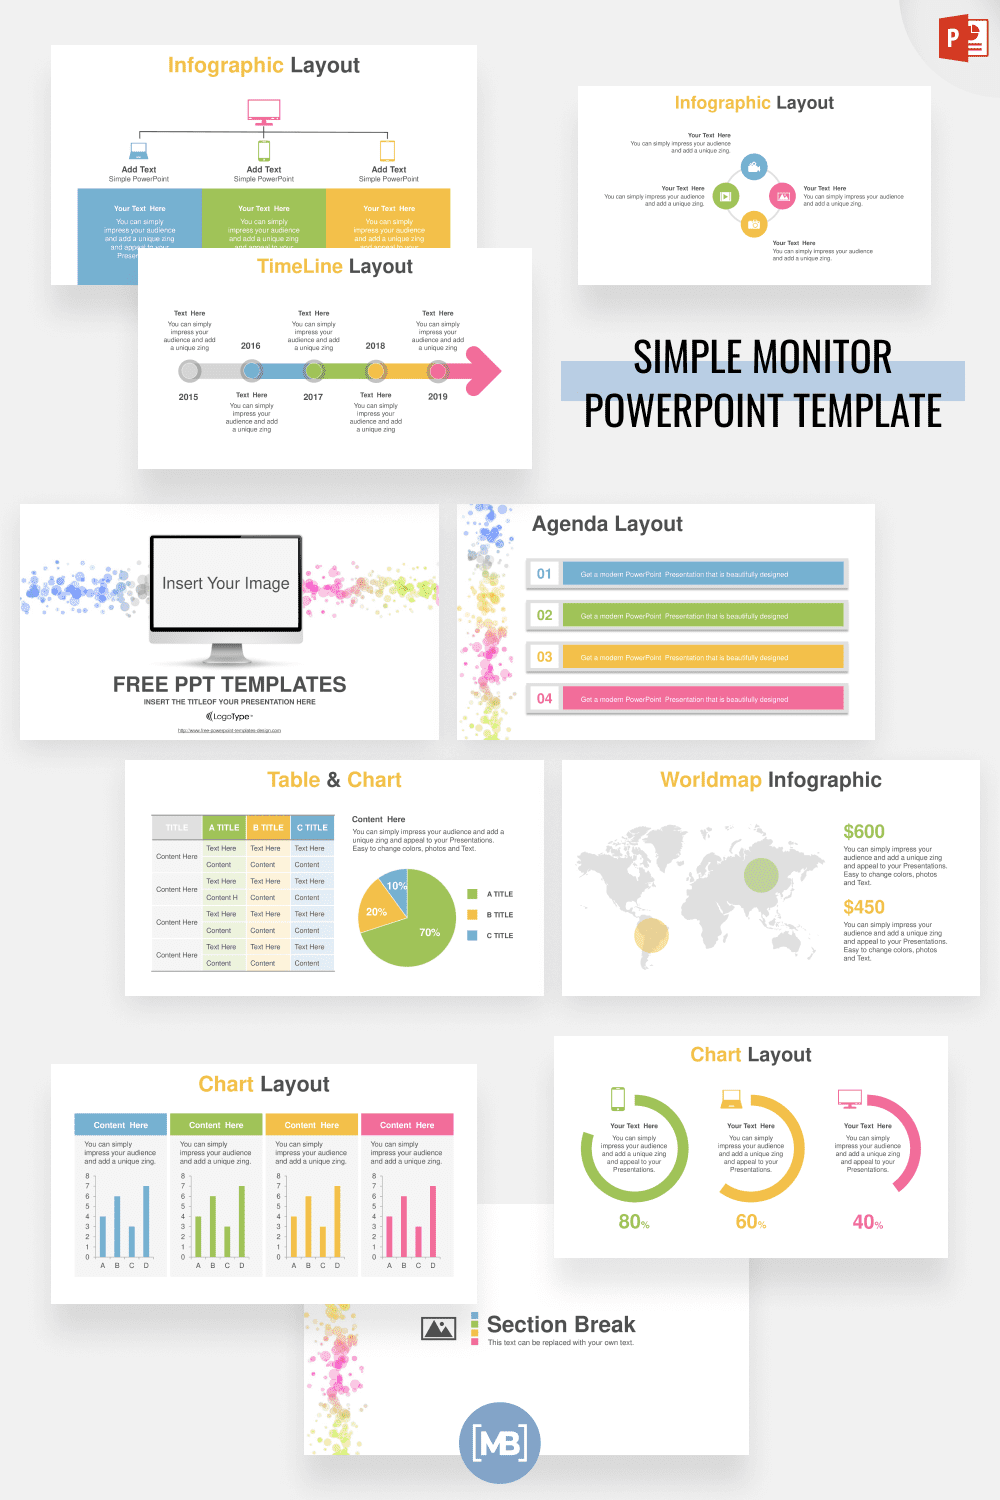 Simple monitor powerpoint template.